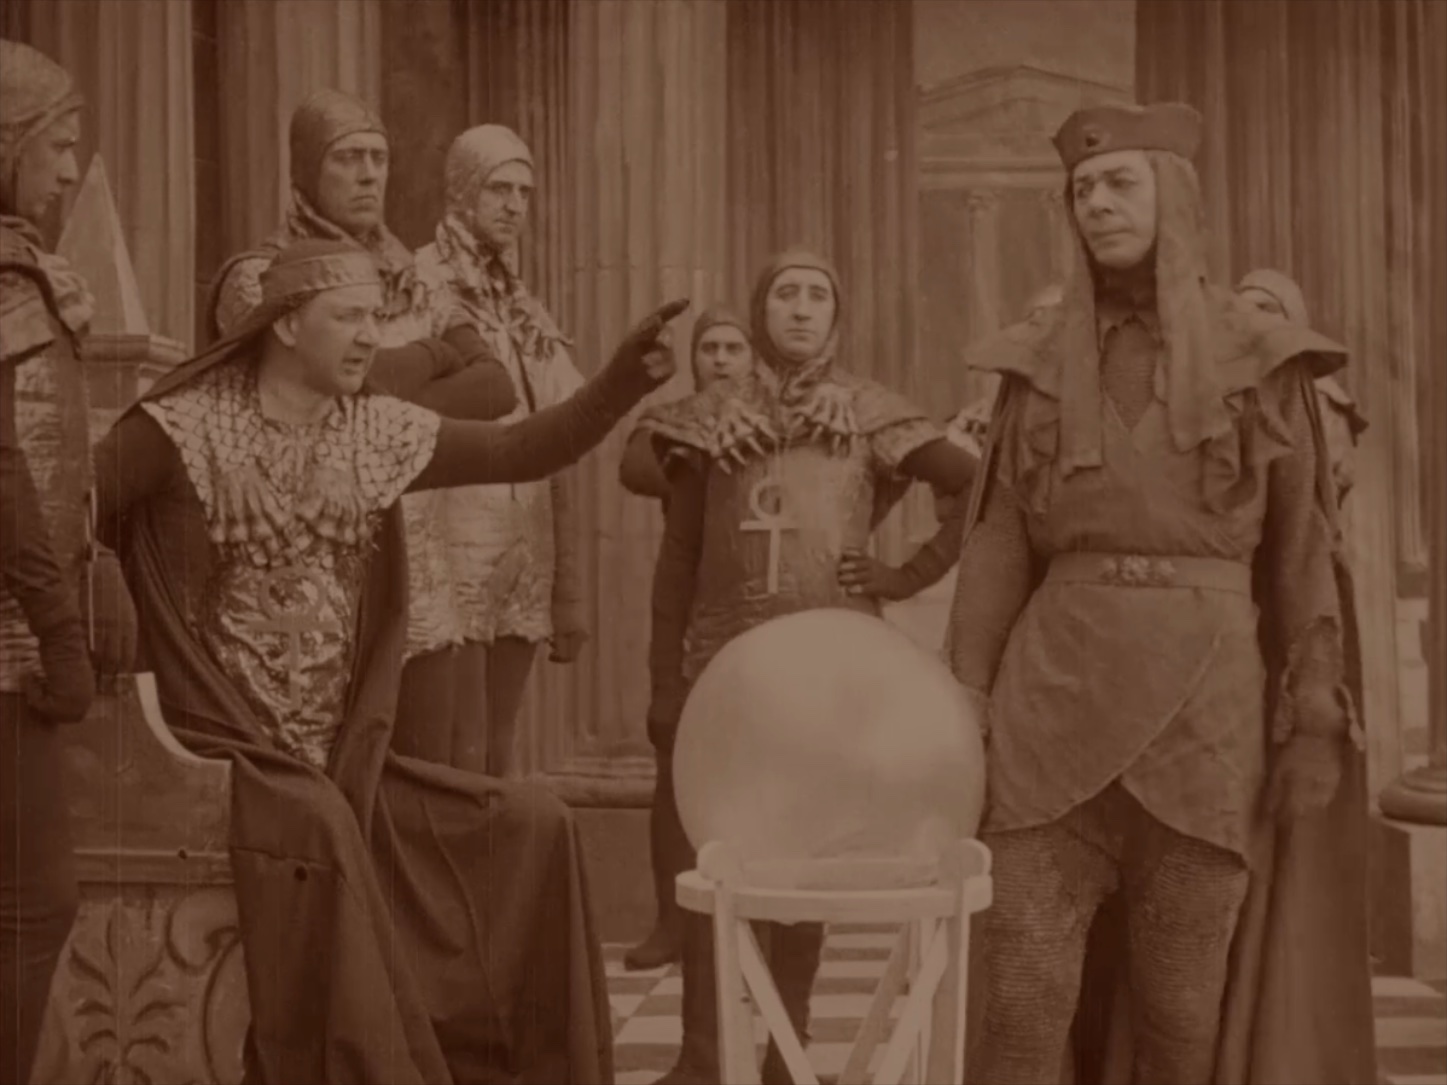 message-from-mars-a-1913-001-court-scene-1000x750.jpg